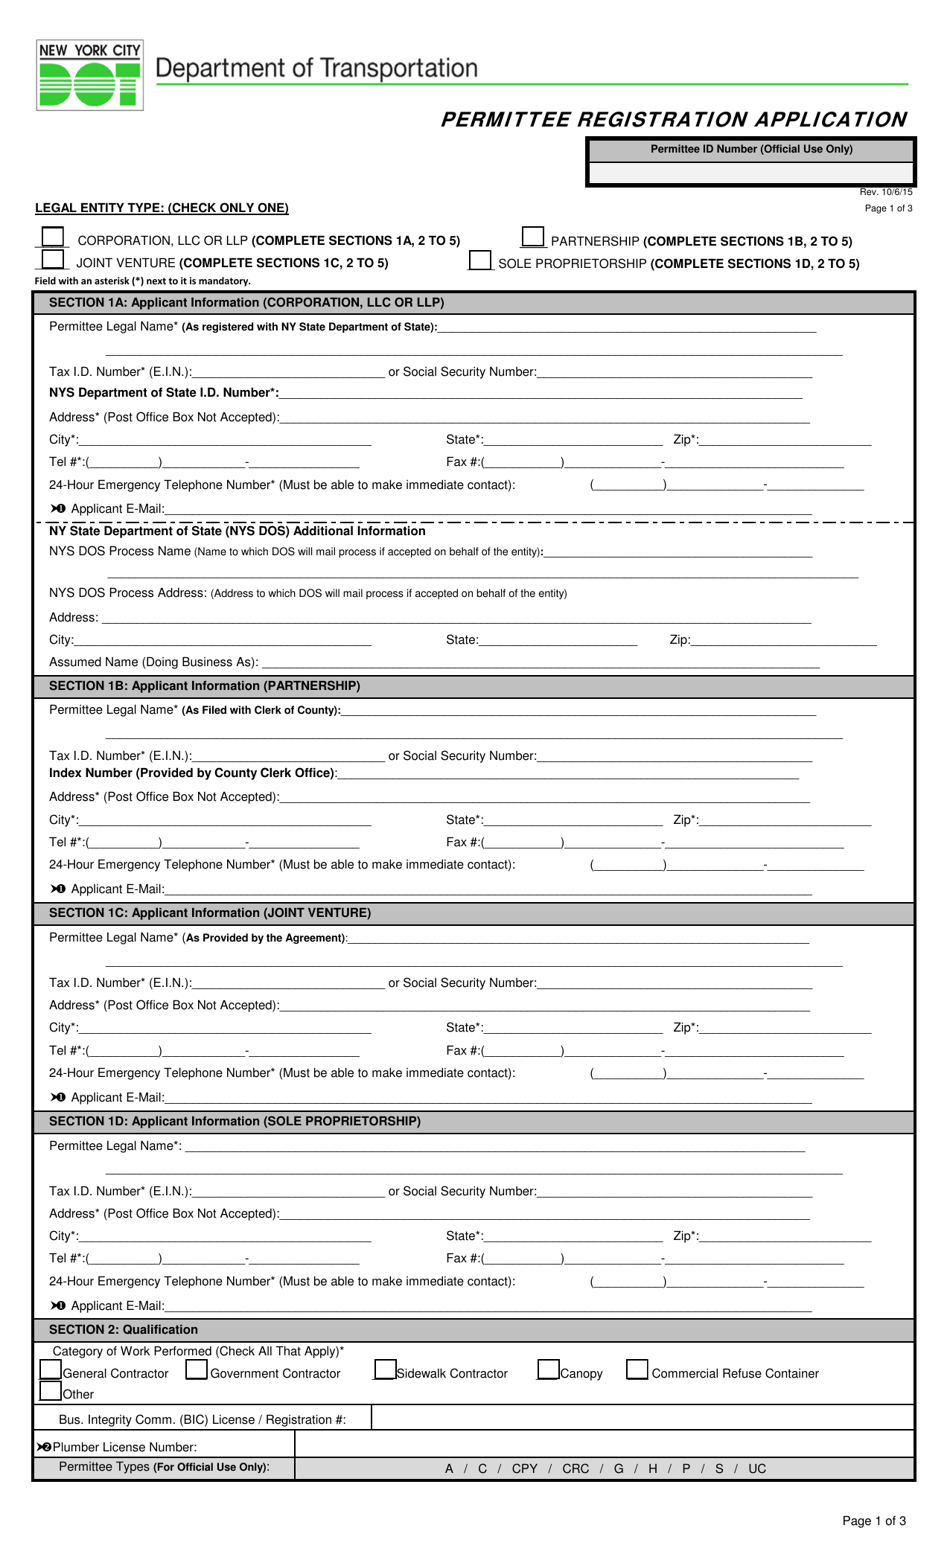 Permittee Registration Application - New York City, Page 1